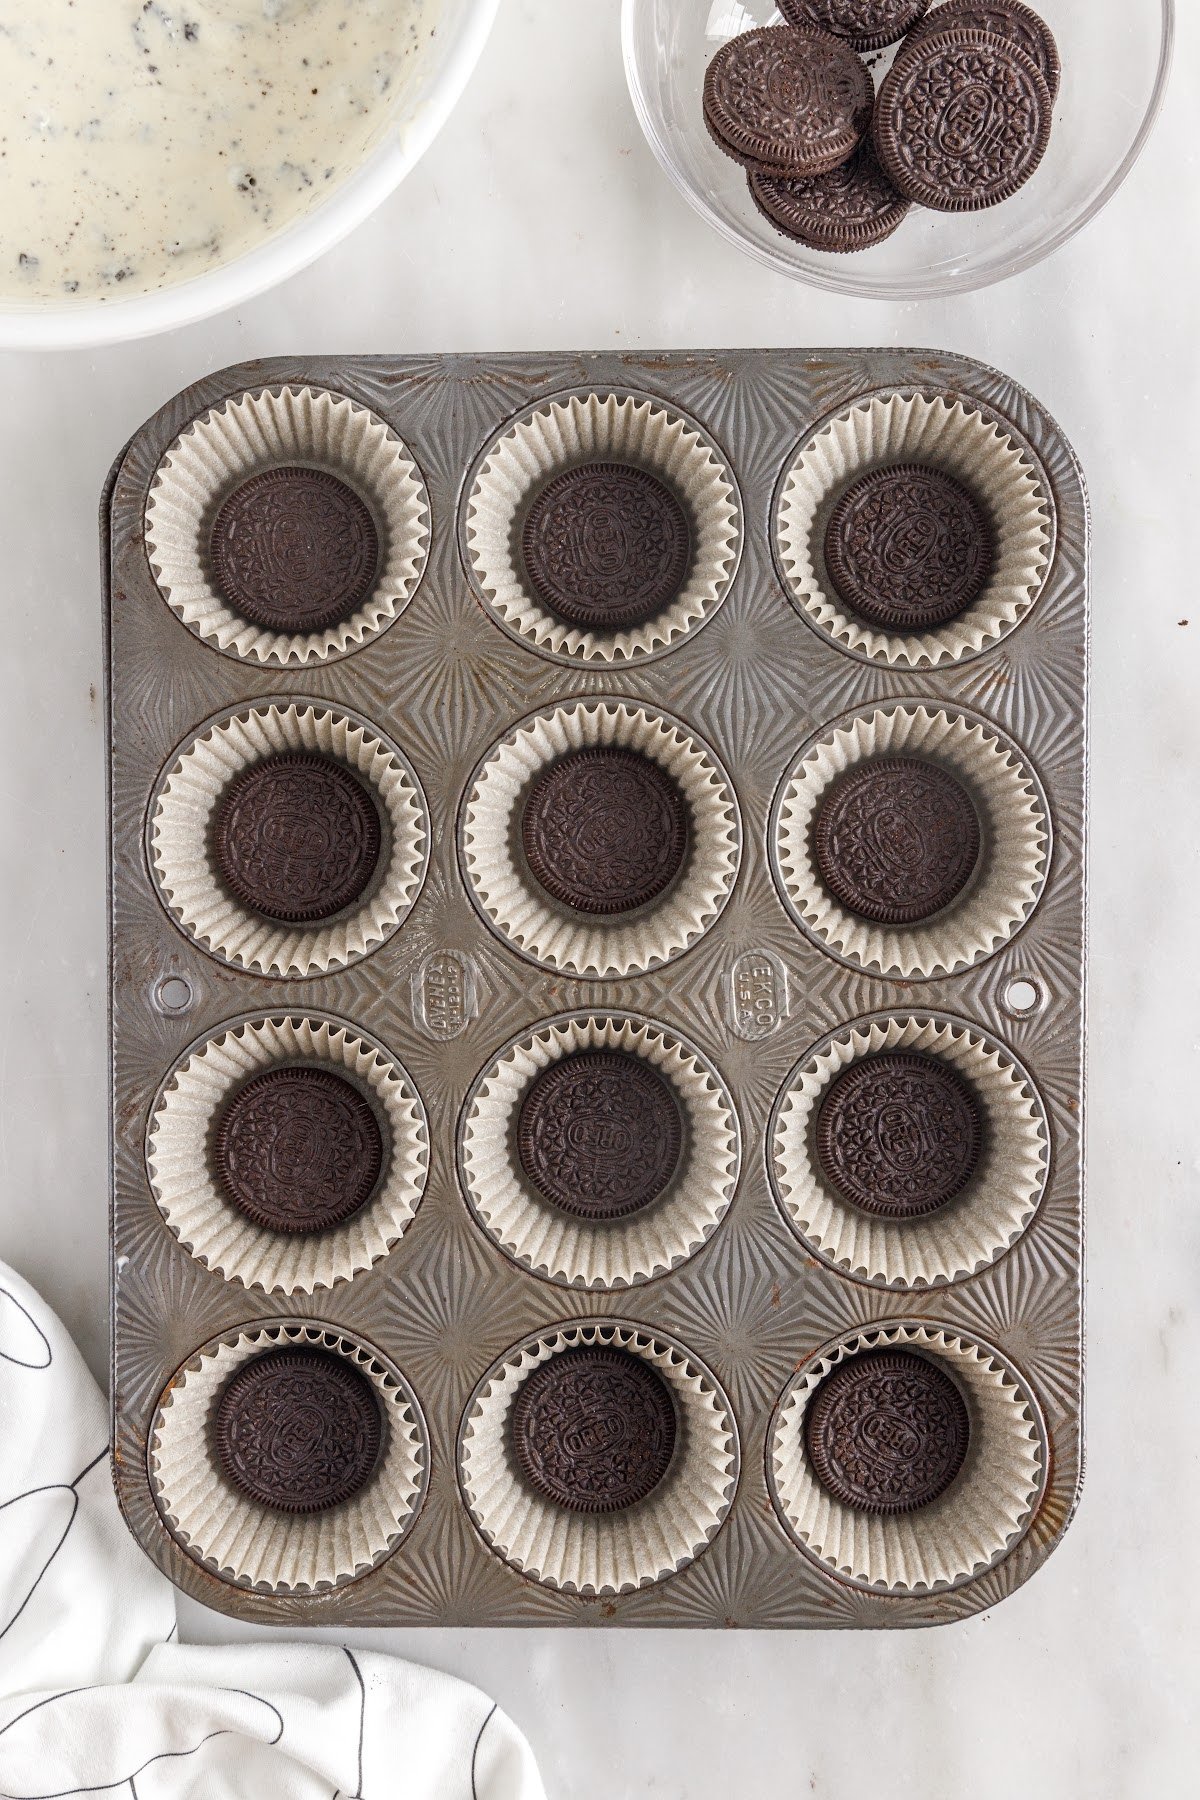 Muffin Pan lined with cupcake liners and an Oreo in the center of each one.